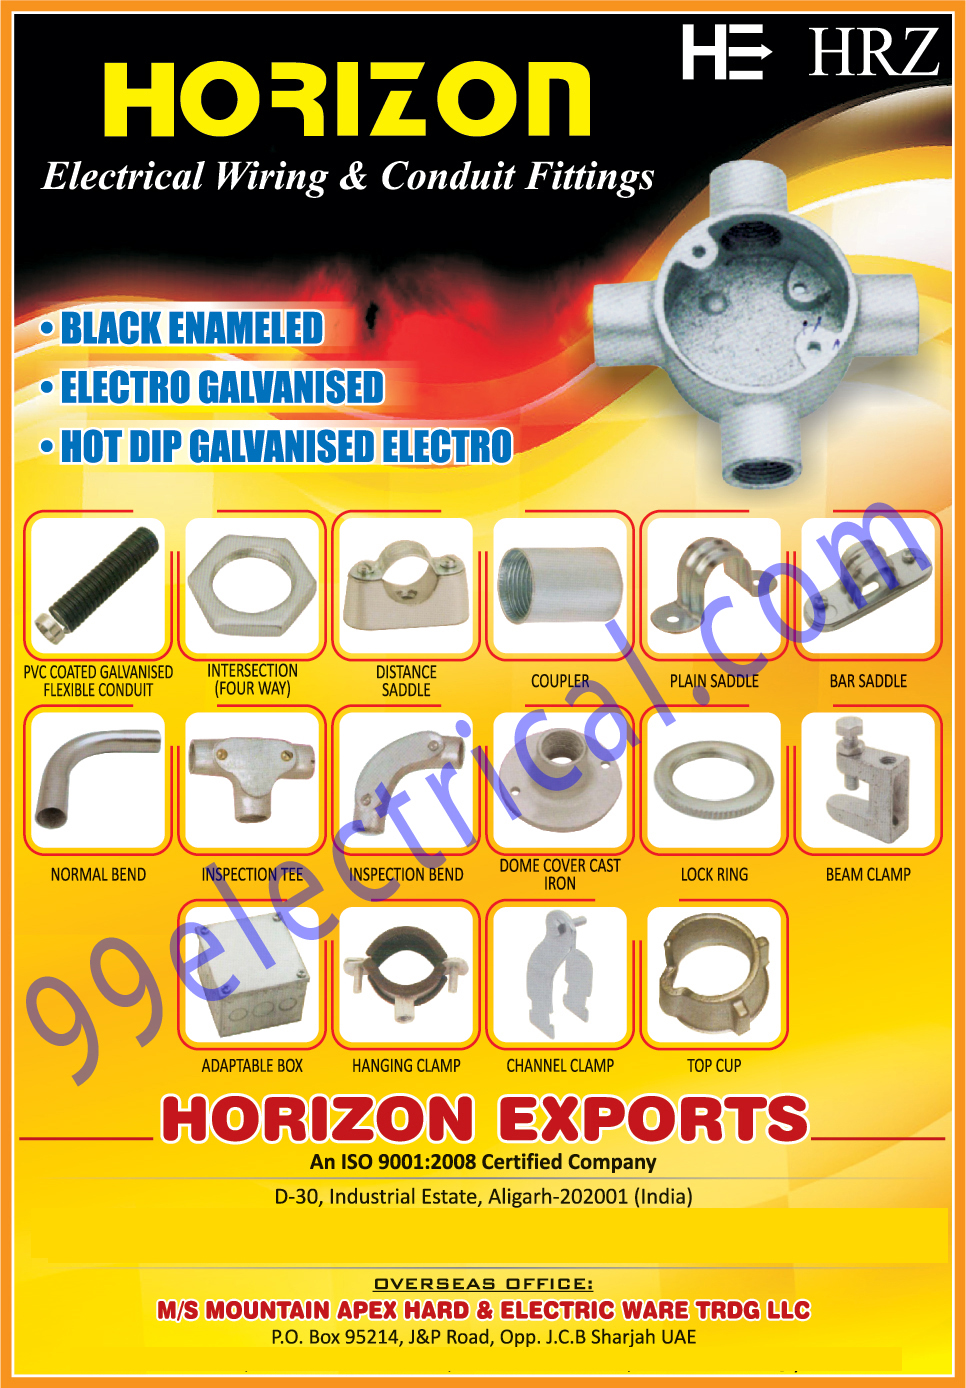 Electrical Wirings, Conduit Fittings, Normal Bends, Inspection Tee, Inspection Bends, Dome Cover Cast Irons, Lock Rings, Beam Clamps, Channel Clamps, Top Cups, Hanging Clamps, Adaptable Boxes, Bar Saddles, Plain Saddles, Couplers, Distance Saddles, Intersections, PVC Coated Galvanised Flexible Conduits, Electrical Parts, Electrical Products, Electro Galvanised, Hot Dip Galvanized Electro, Junction Box, Conduit Accessories, GI Boxes, Brass Accessories, Earthing Accessories, Clamps, Cable Lugs, Fastners, Tools, Scaffolding, Saddle